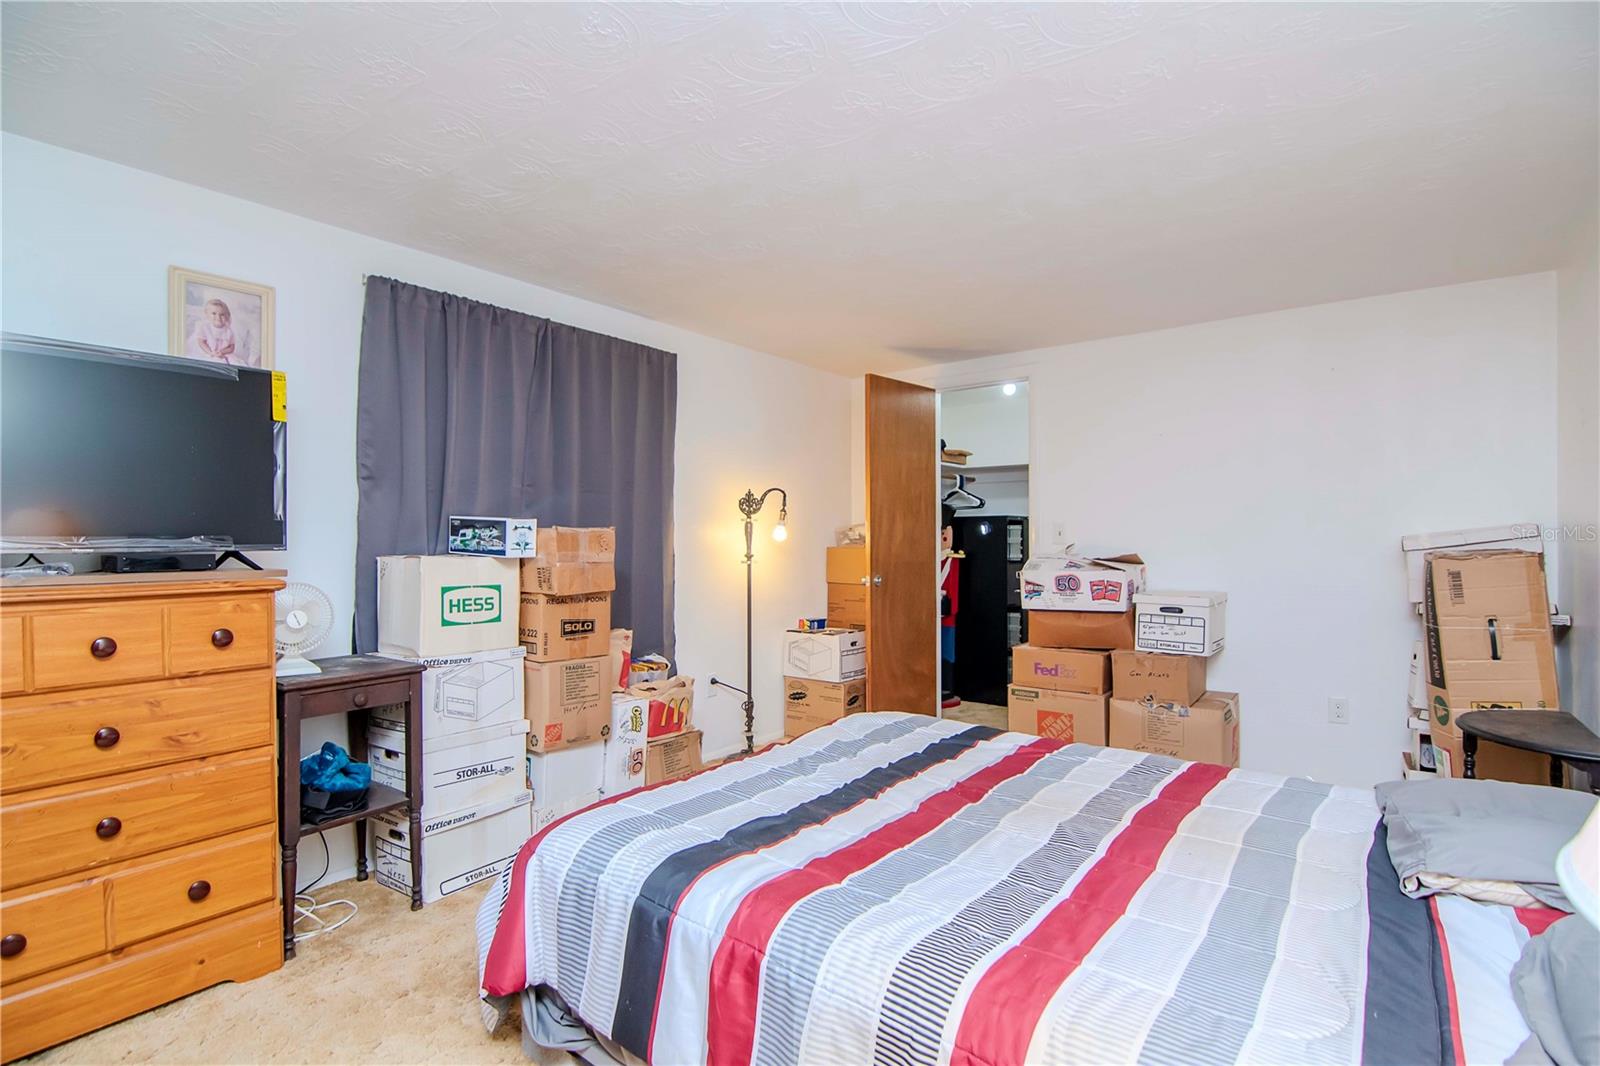 Large 2nd bedroom offers a sizable closet as well.